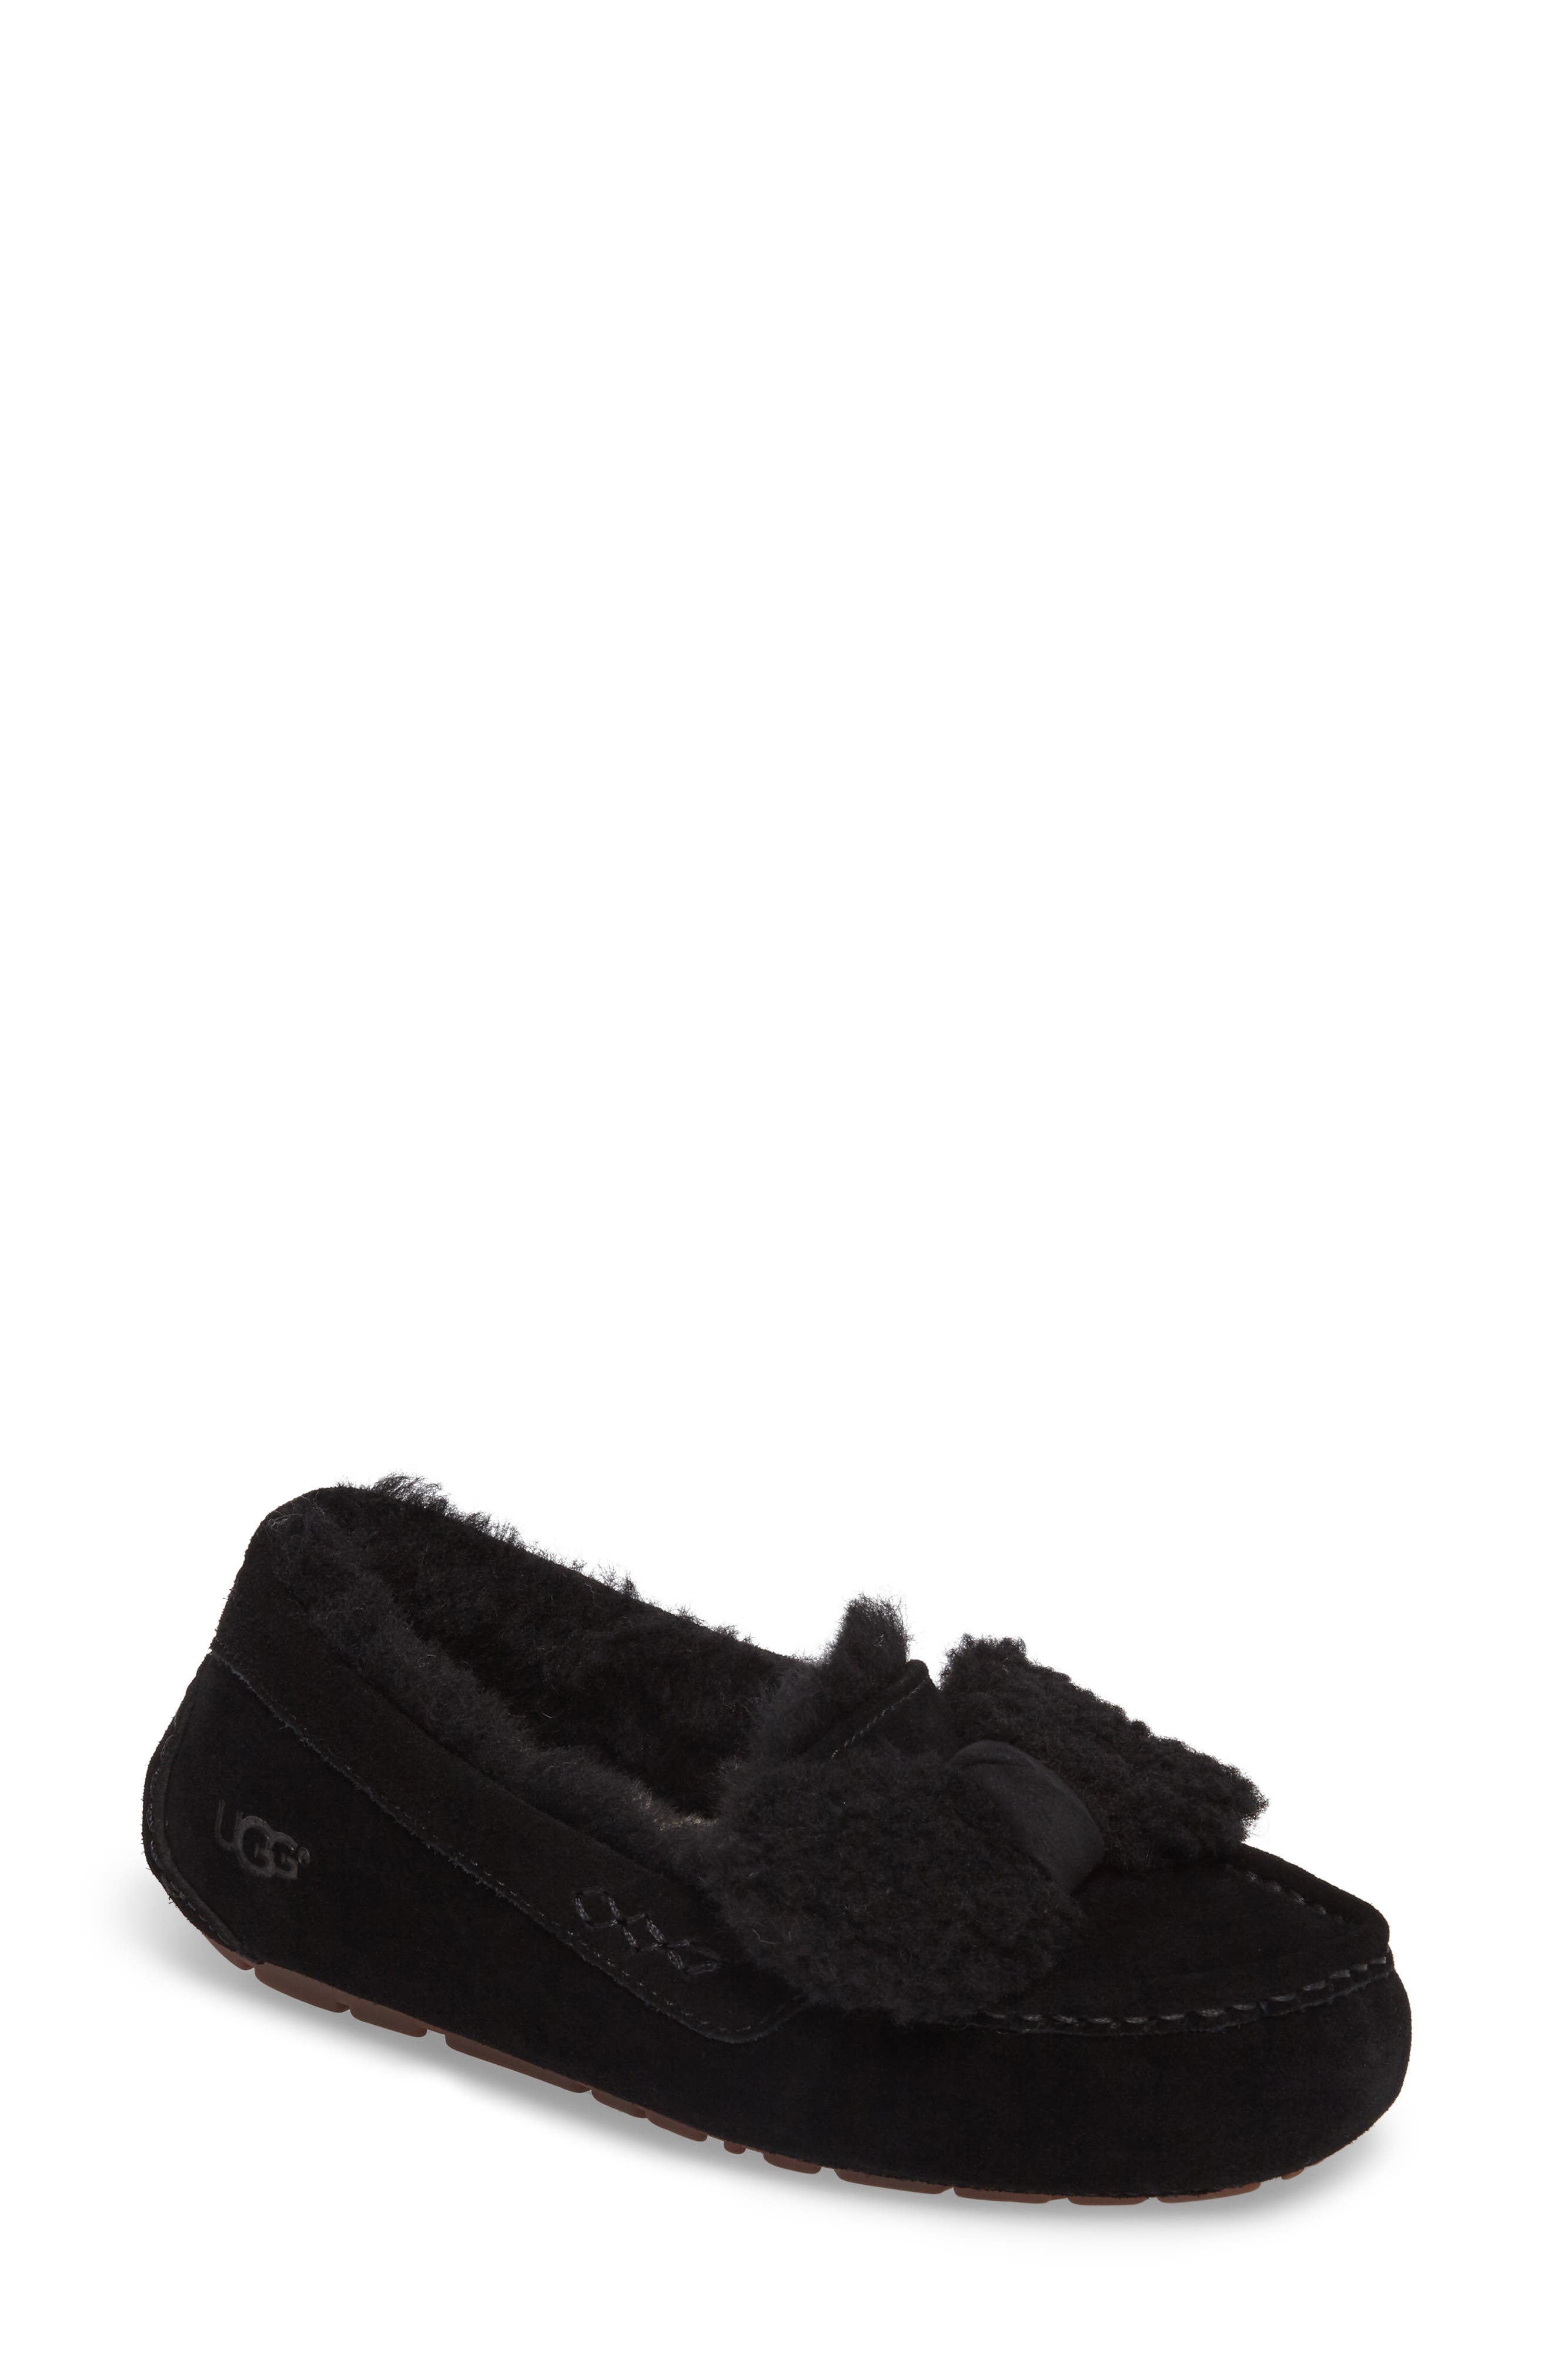 ugg ansley bow slippers